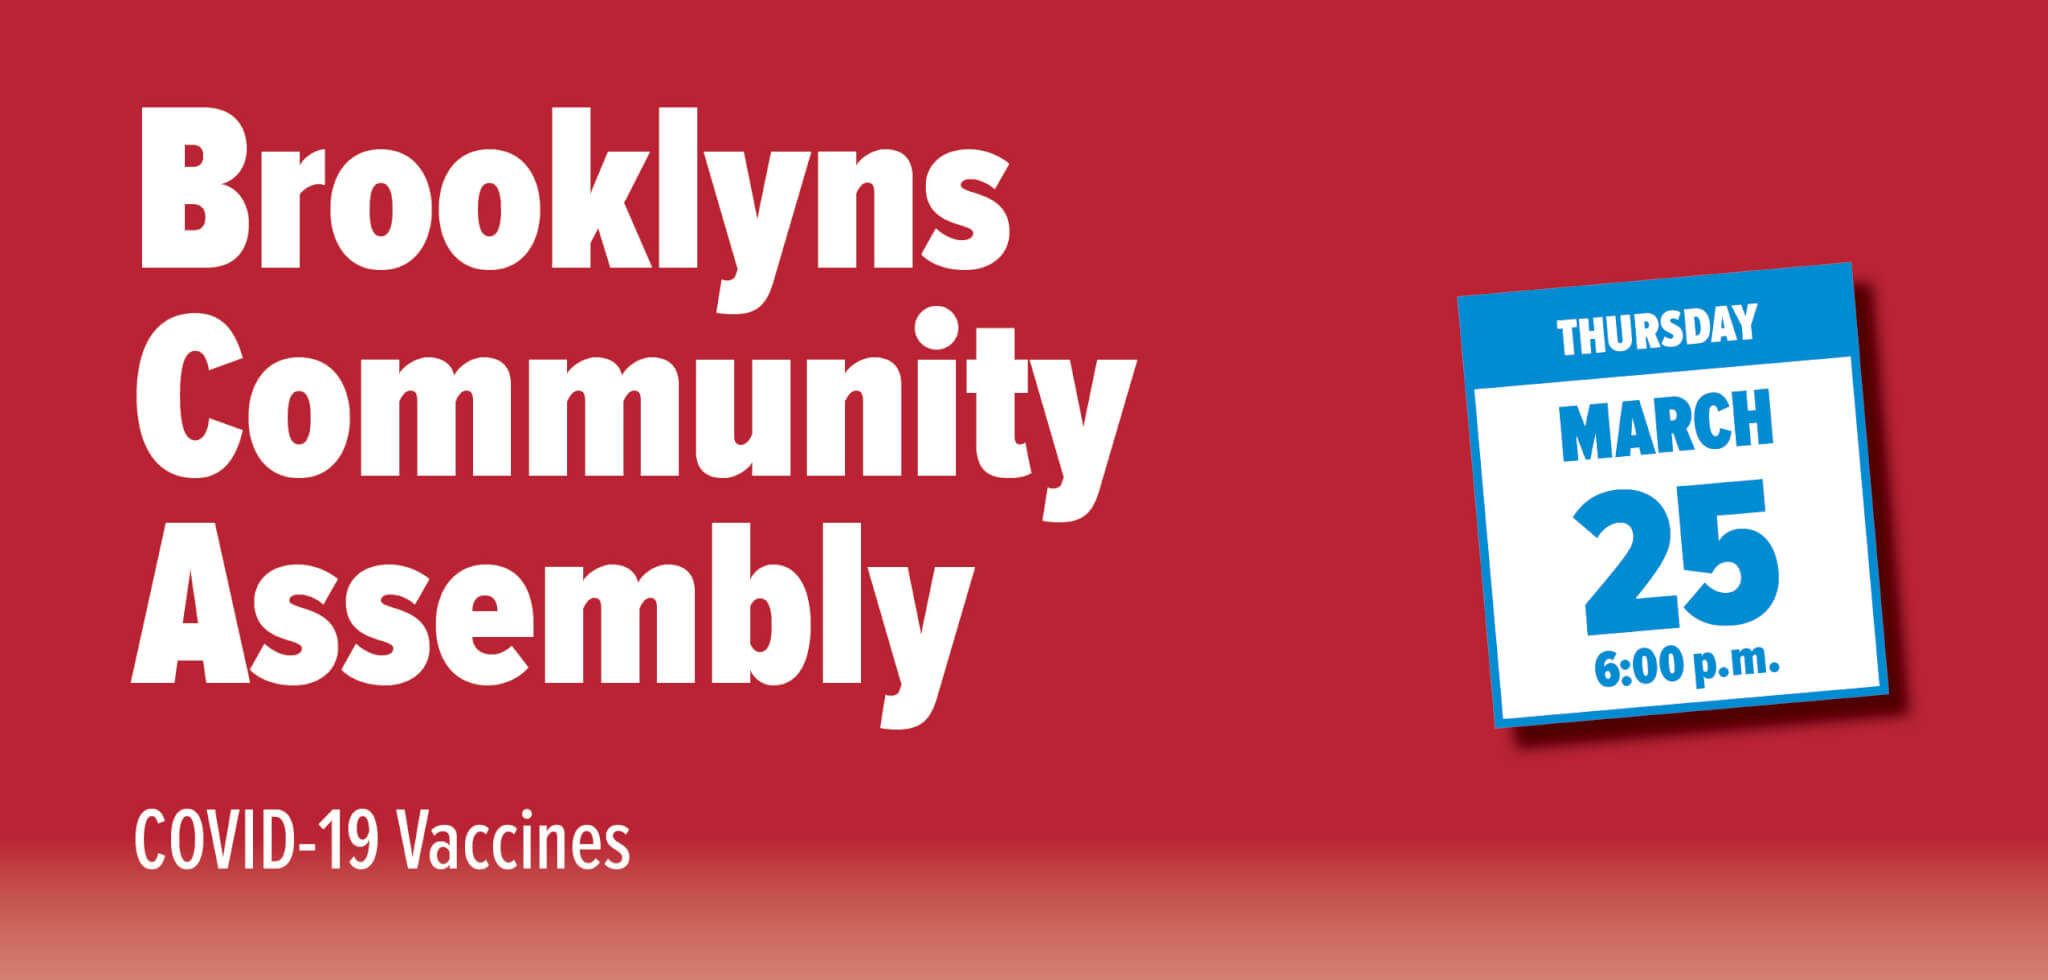 Brooklyns Community Assembly